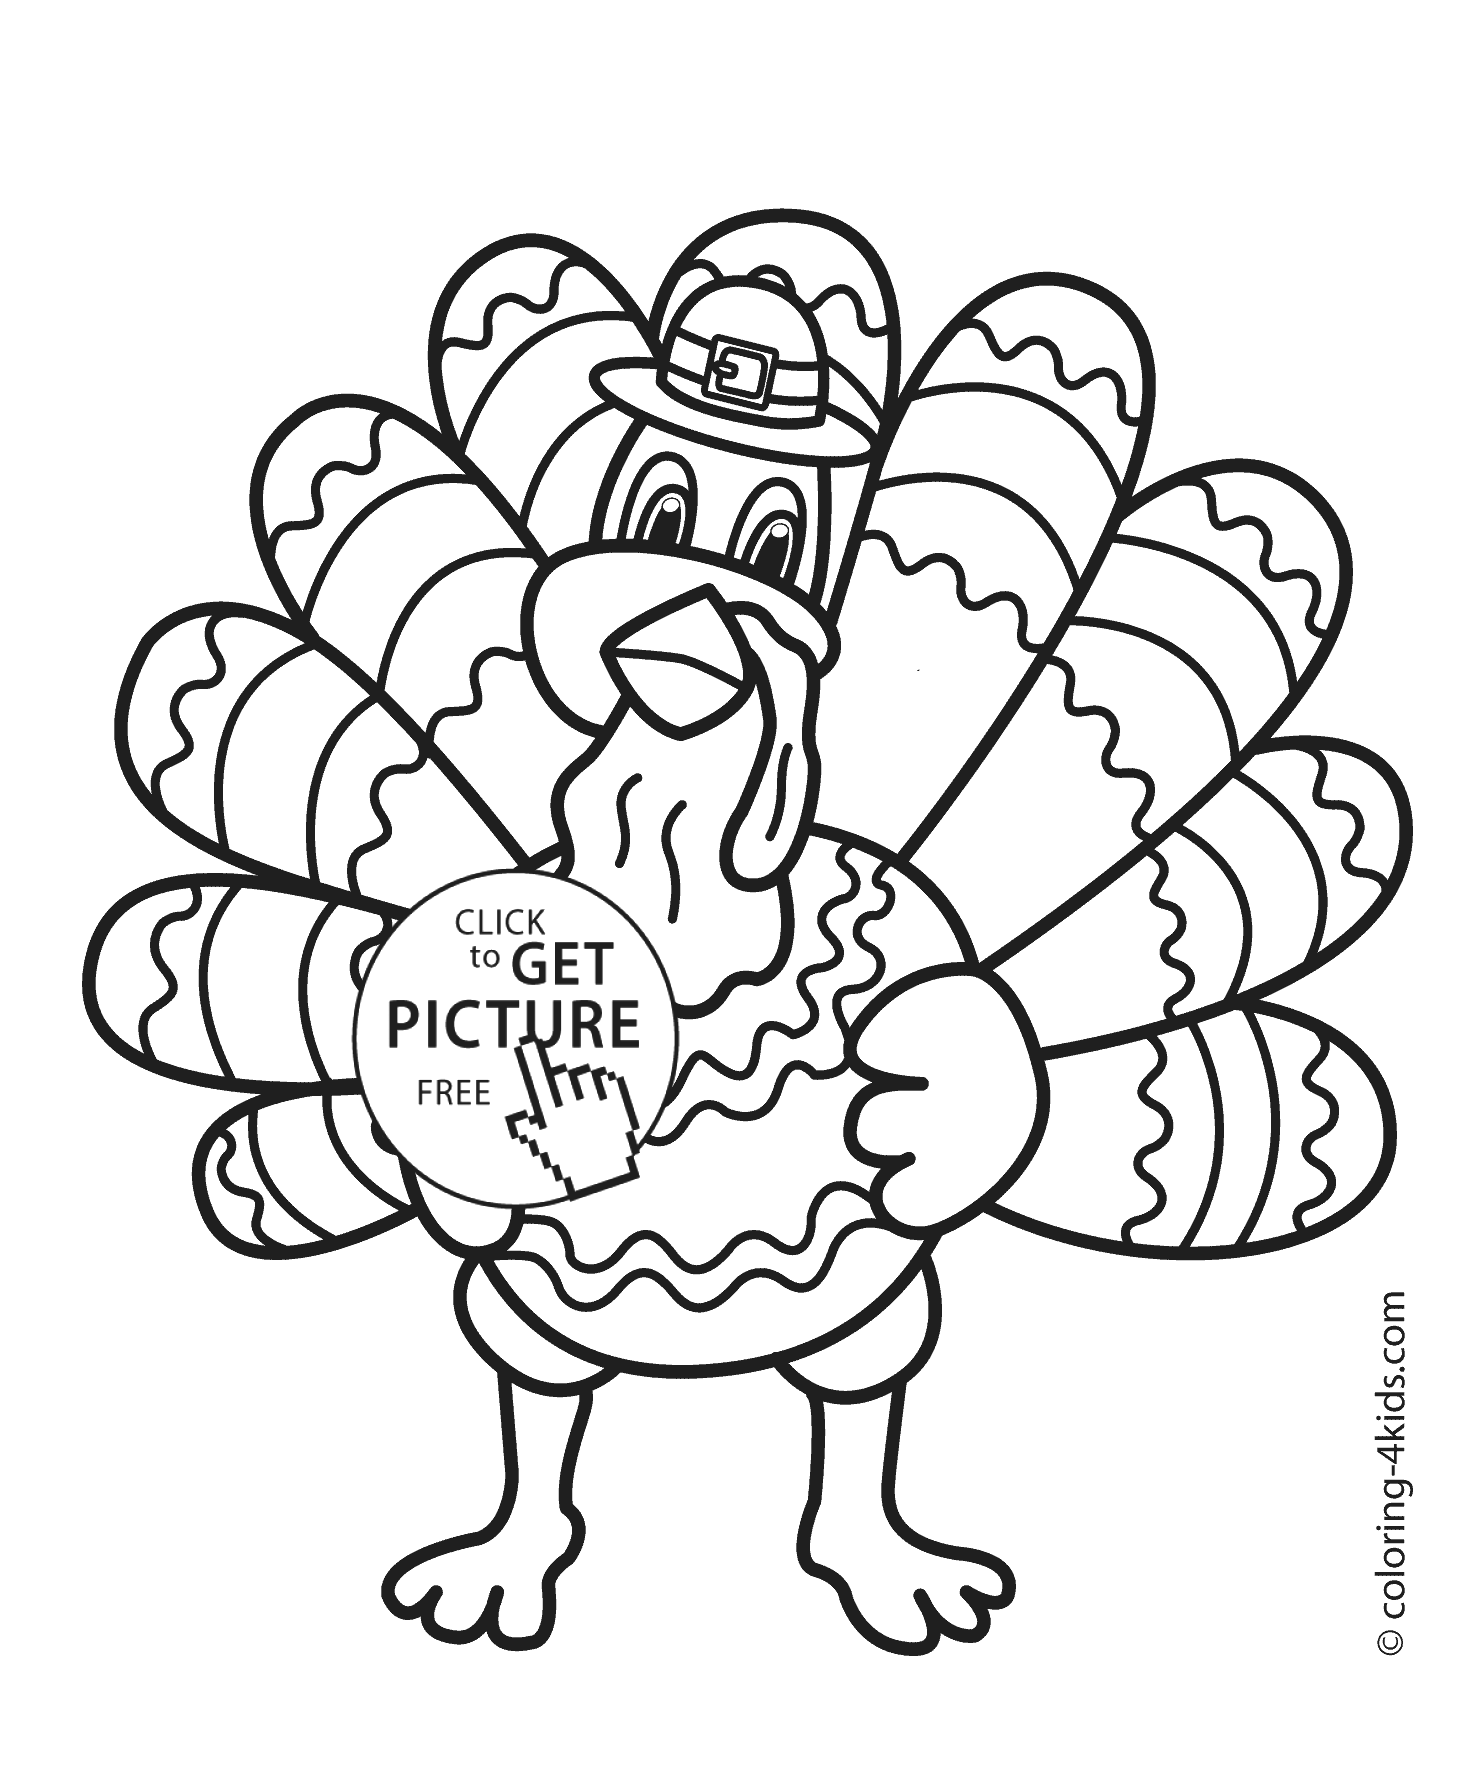 Thanksgiving day turkey coloring pages for kids, printable free